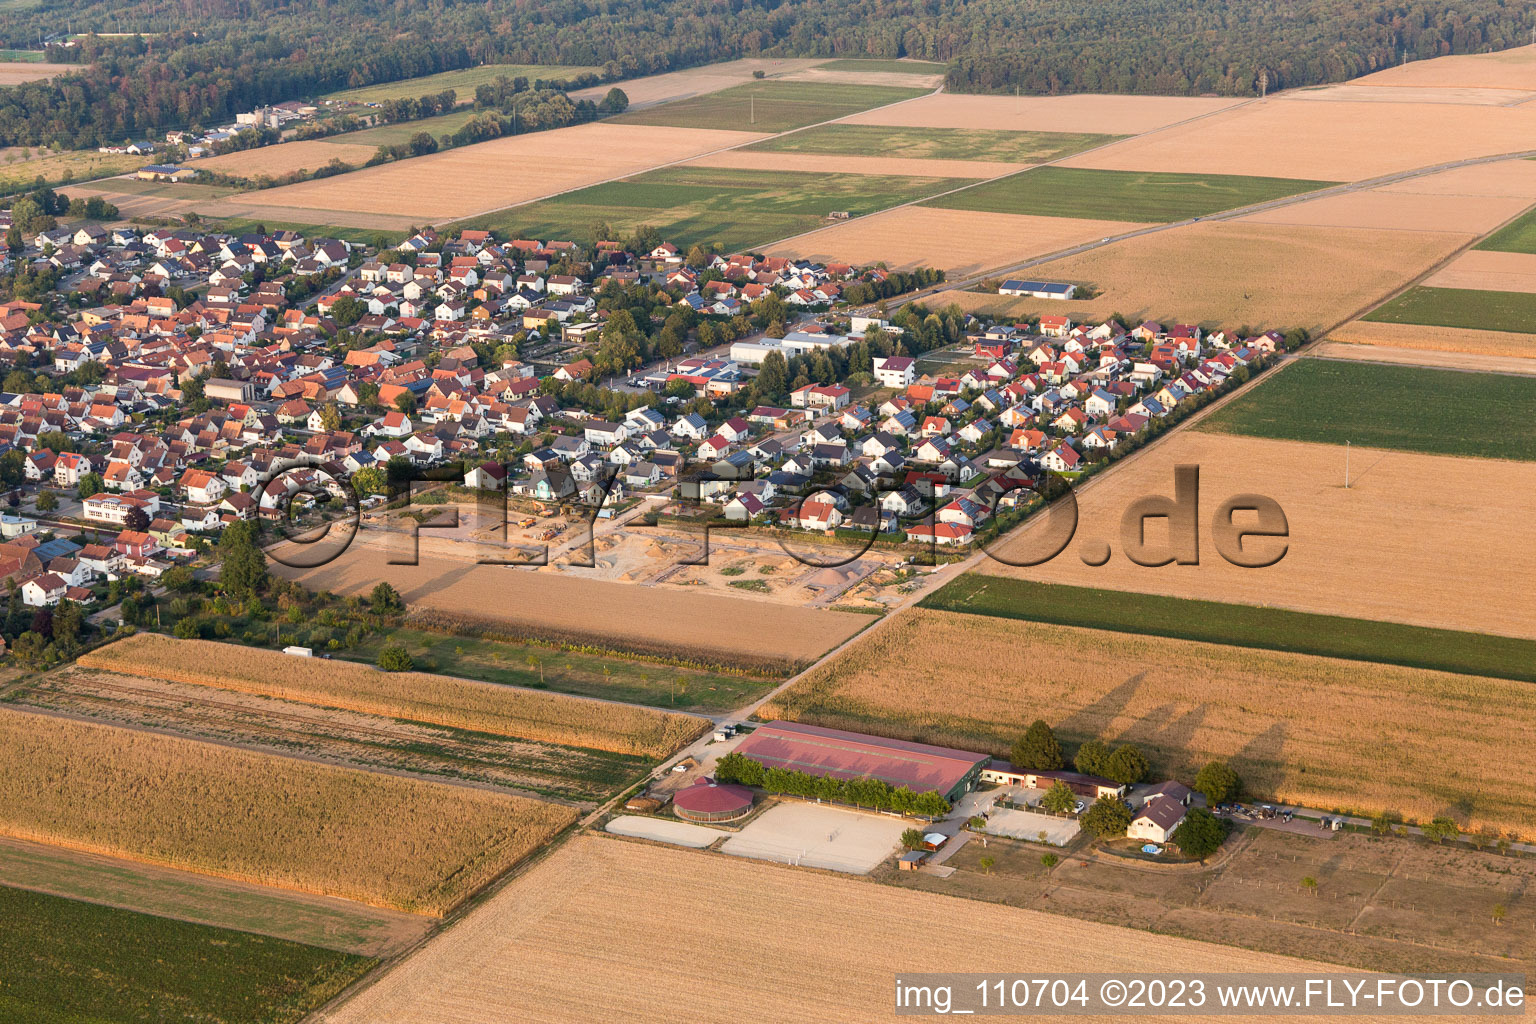 Expansion of the new Brotäcker development area in Steinweiler in the state Rhineland-Palatinate, Germany